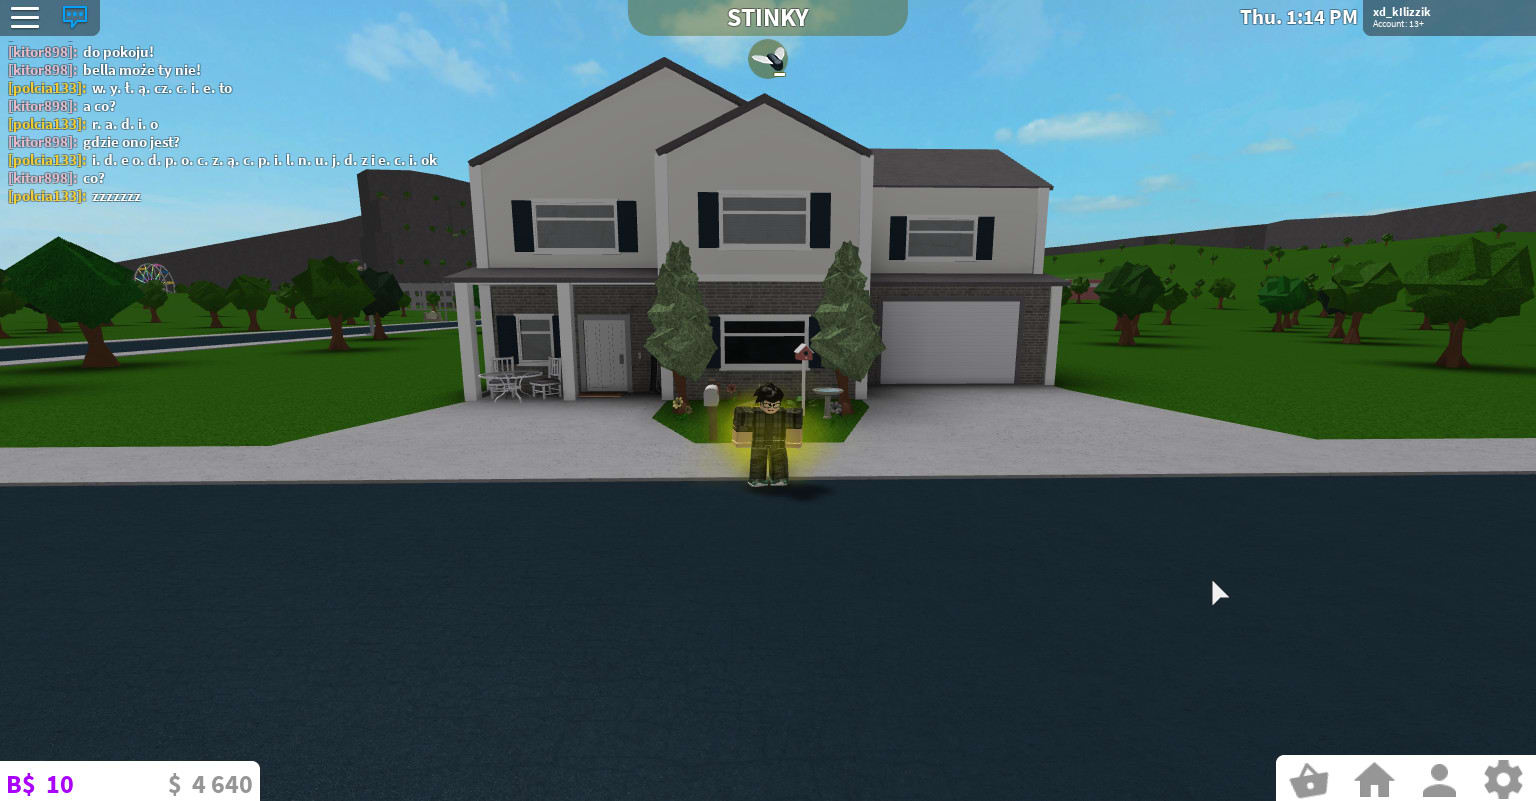 Build You A House In Bloxburg Roblox By Fortnitenuoogit - bloxburg roblox house making for 40k